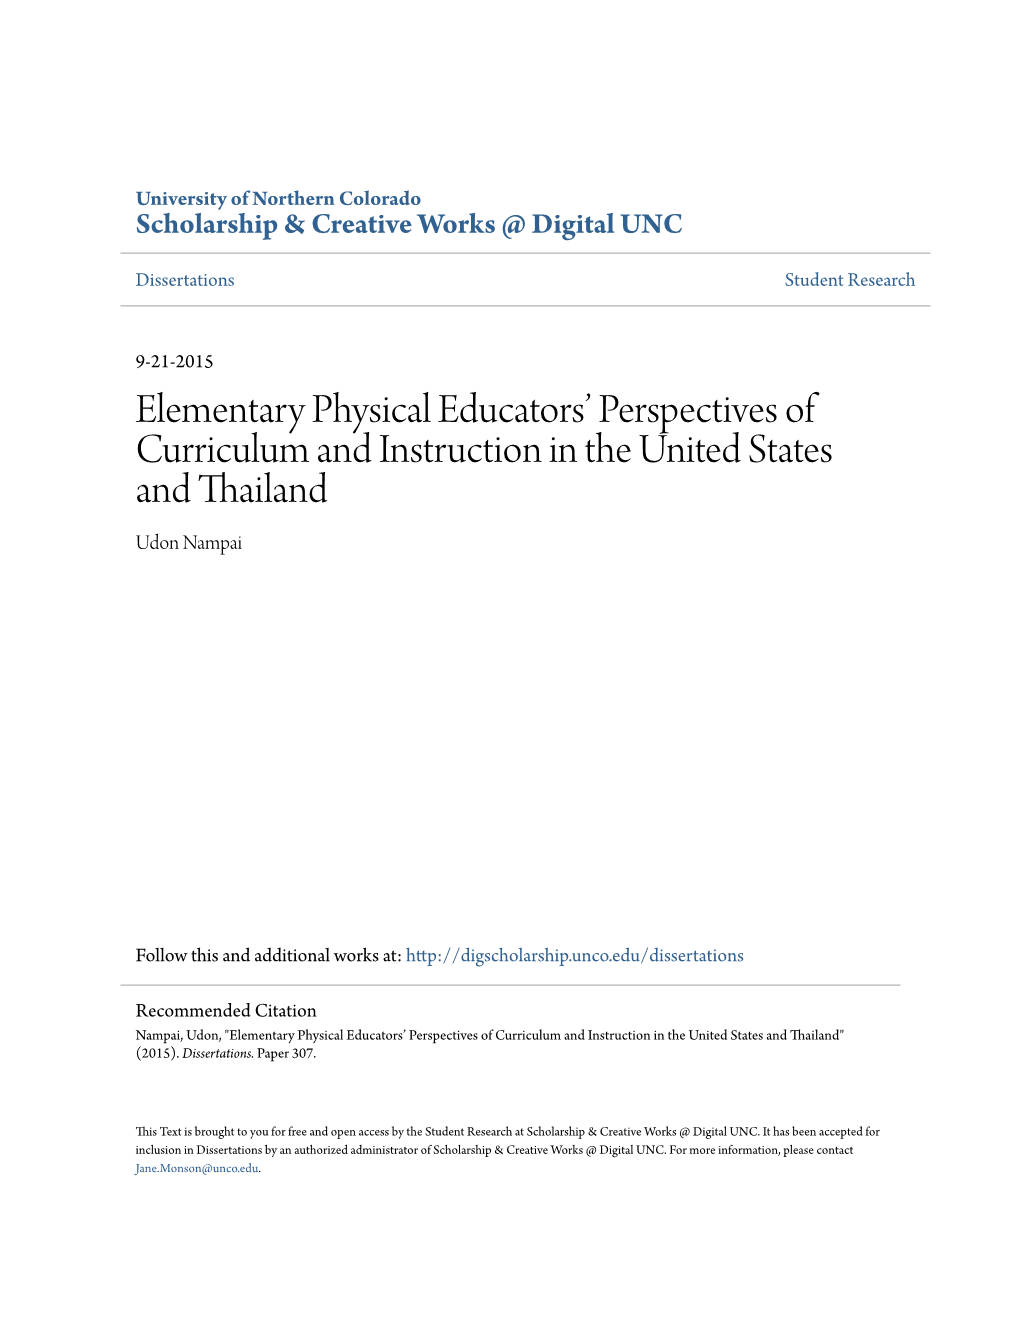 Elementary Physical Educators' Perspectives of Curriculum And